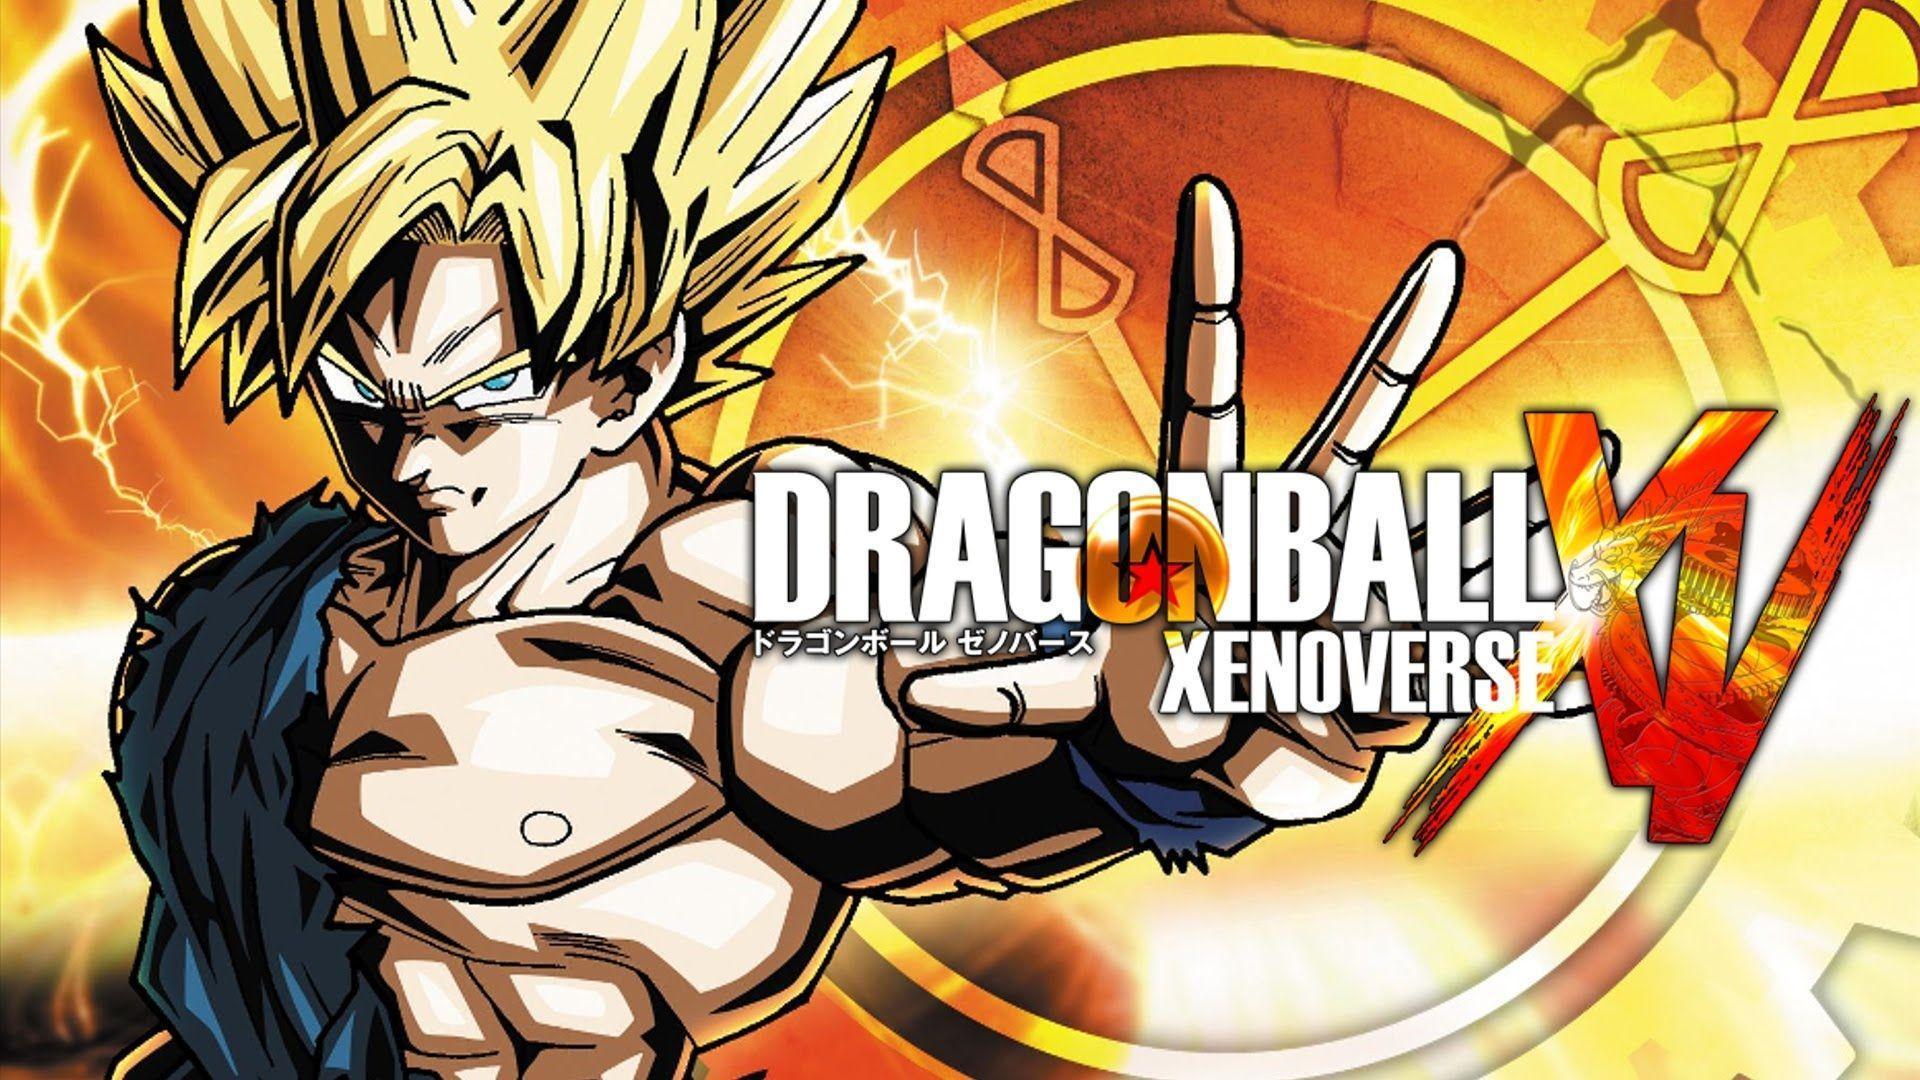 Buy Dragon Ball XENOVERSE (Steam) and download